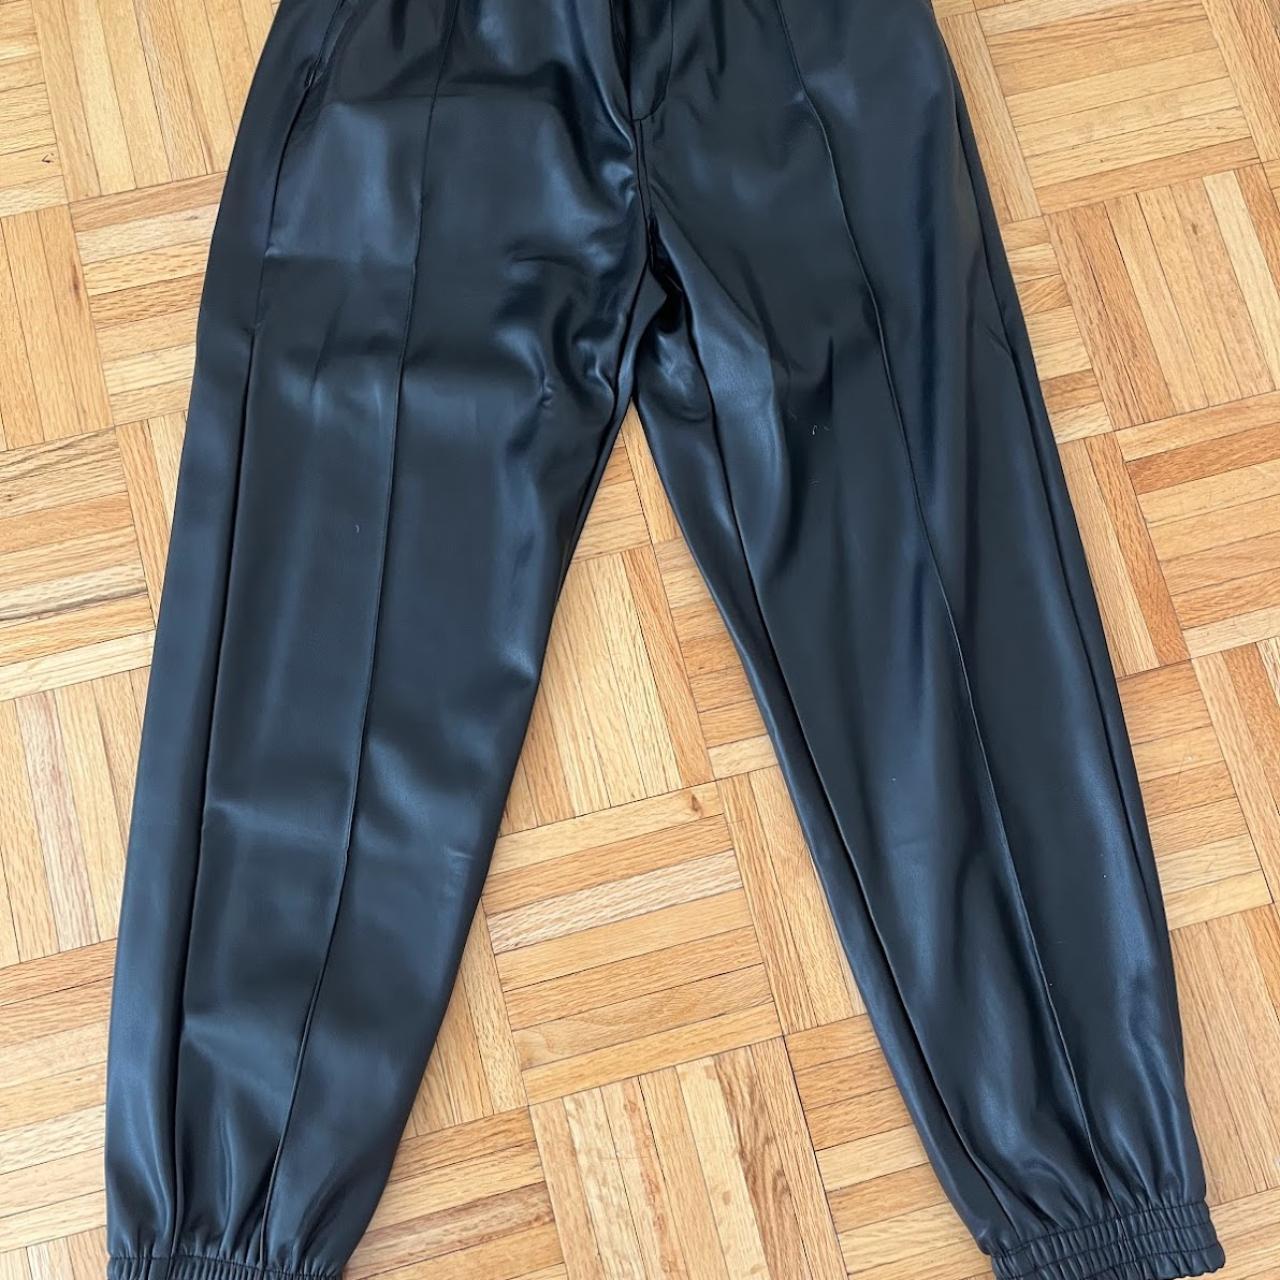 Bershka Faux Leather Pants. Size M but bands on both